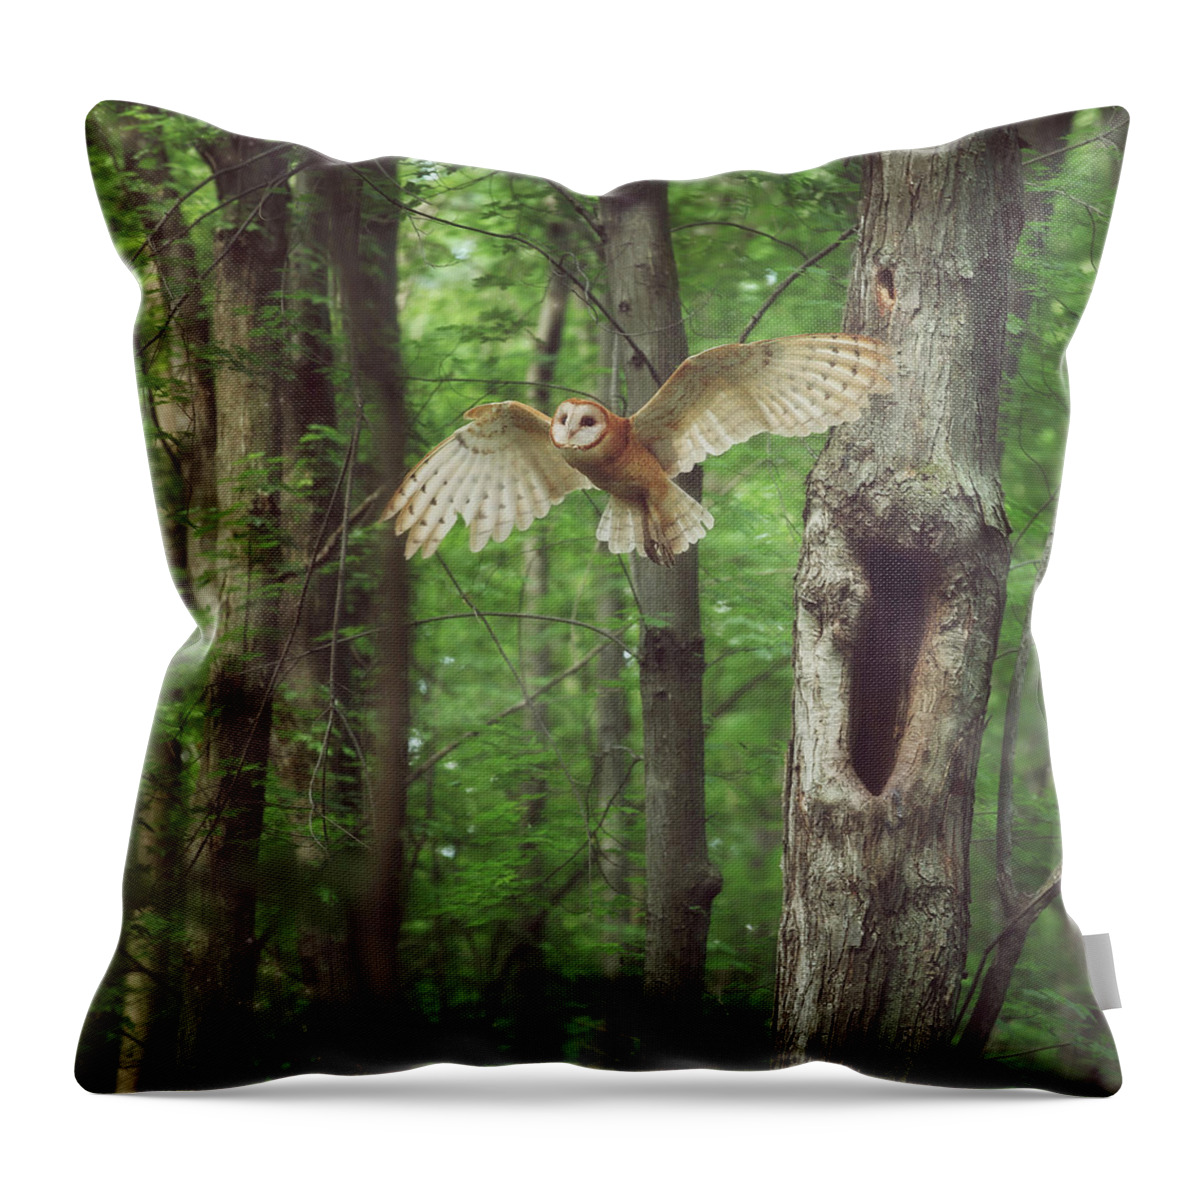 Enchanted Forest Throw Pillow featuring the photograph Enchanted Forest Cropped Version by Carrie Ann Grippo-Pike